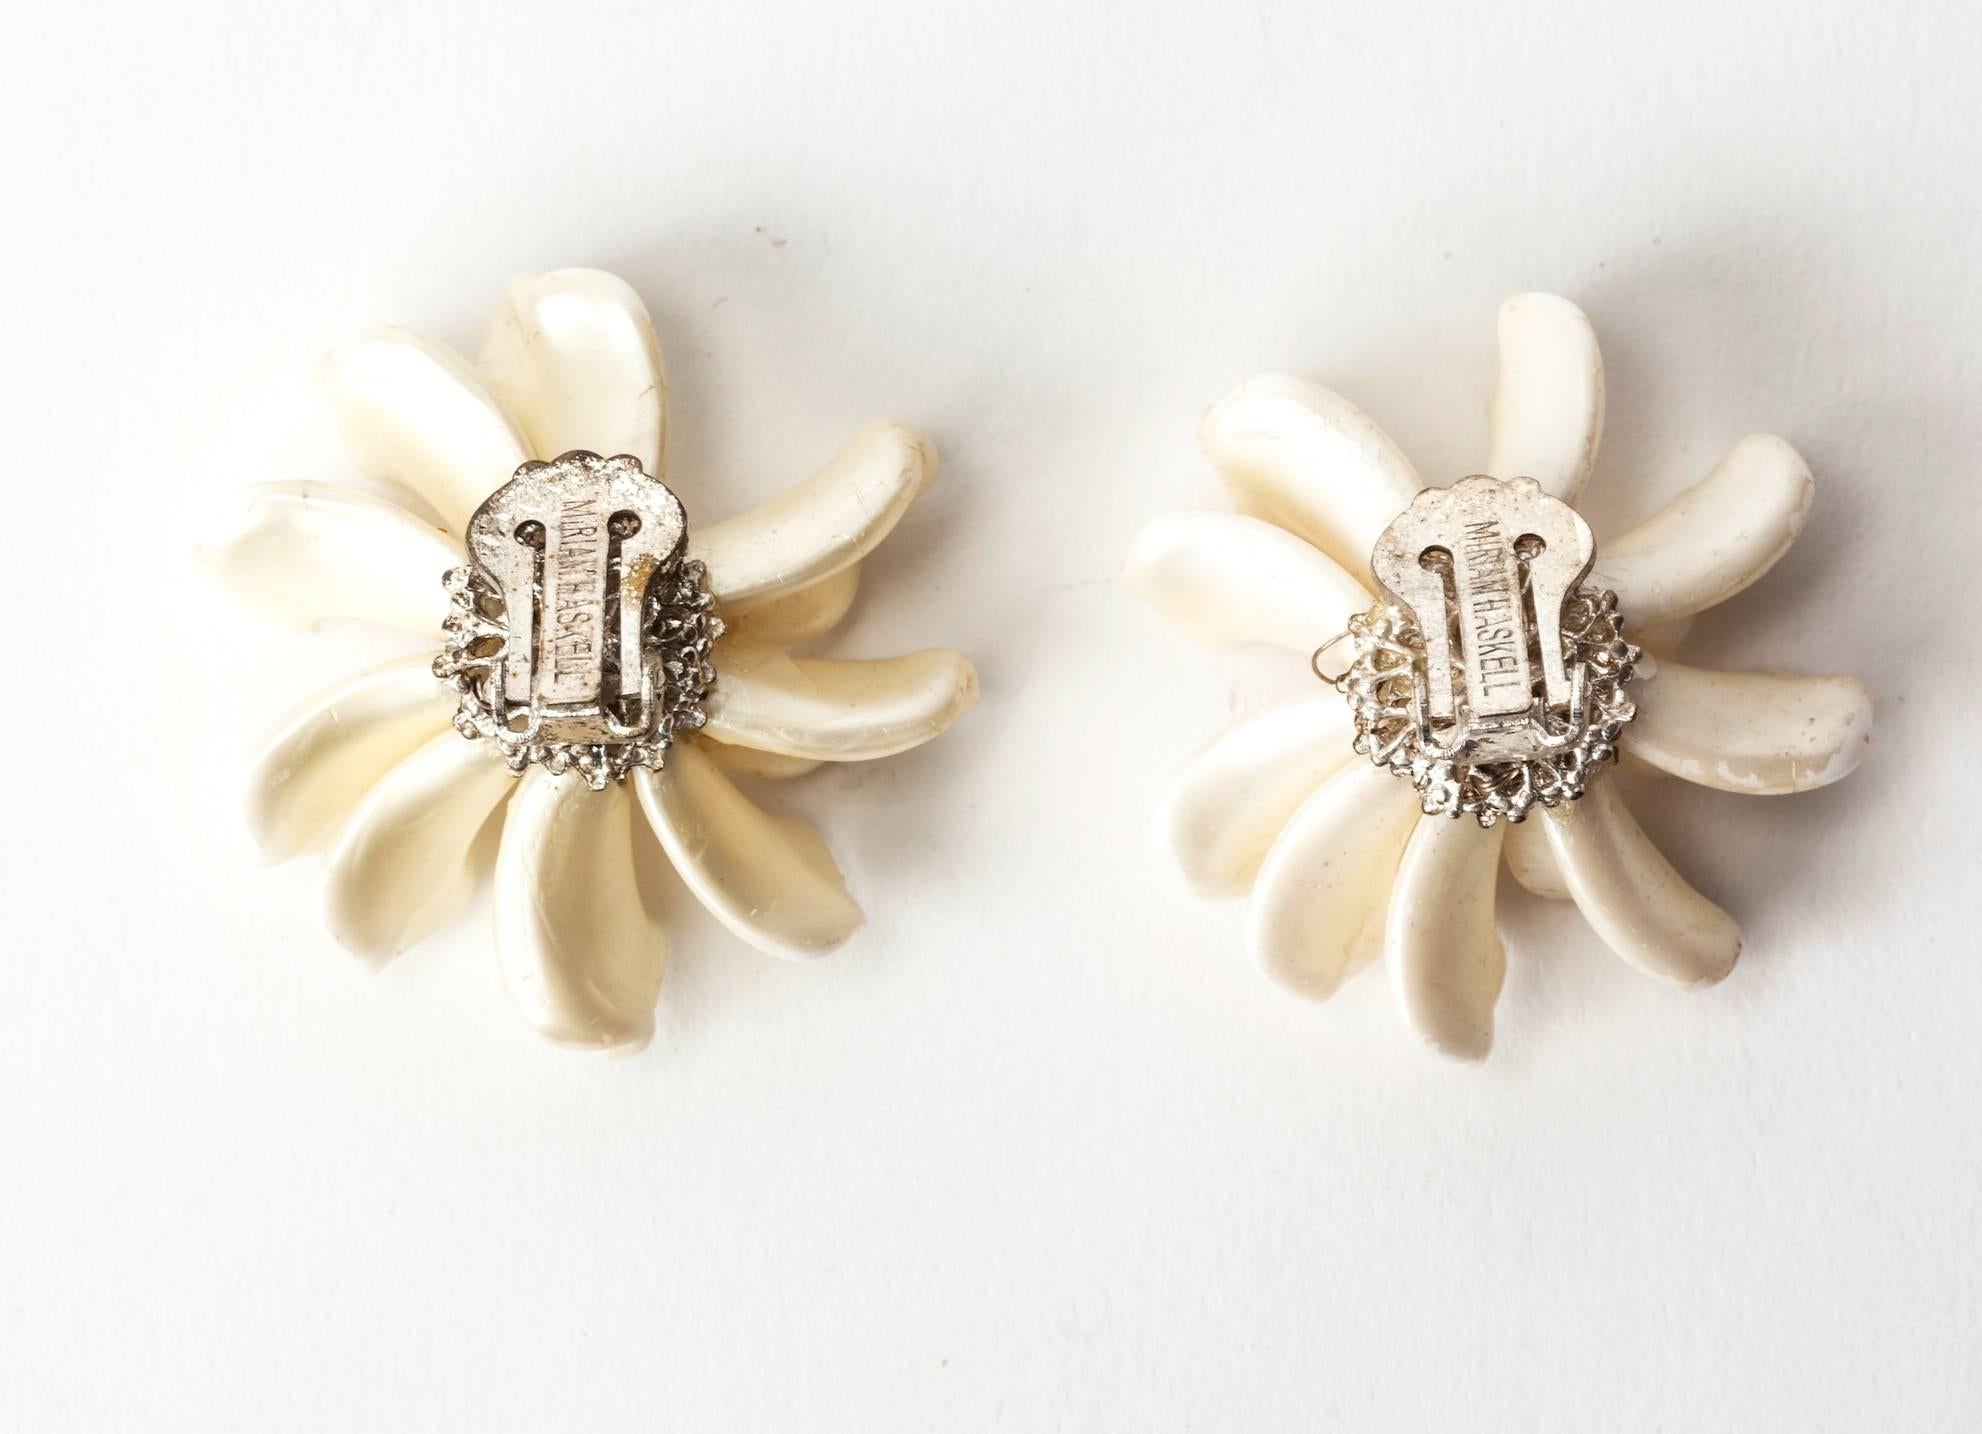 Miriam Haskell naturalistic signature faux freshwater pearl flower earclips.  The hand formed pearlized glass petals are set in silver gilt filigree.  The focal center pearl of white freshwater. Clip back fittings. 1950's USA. 
Excellent condition. 